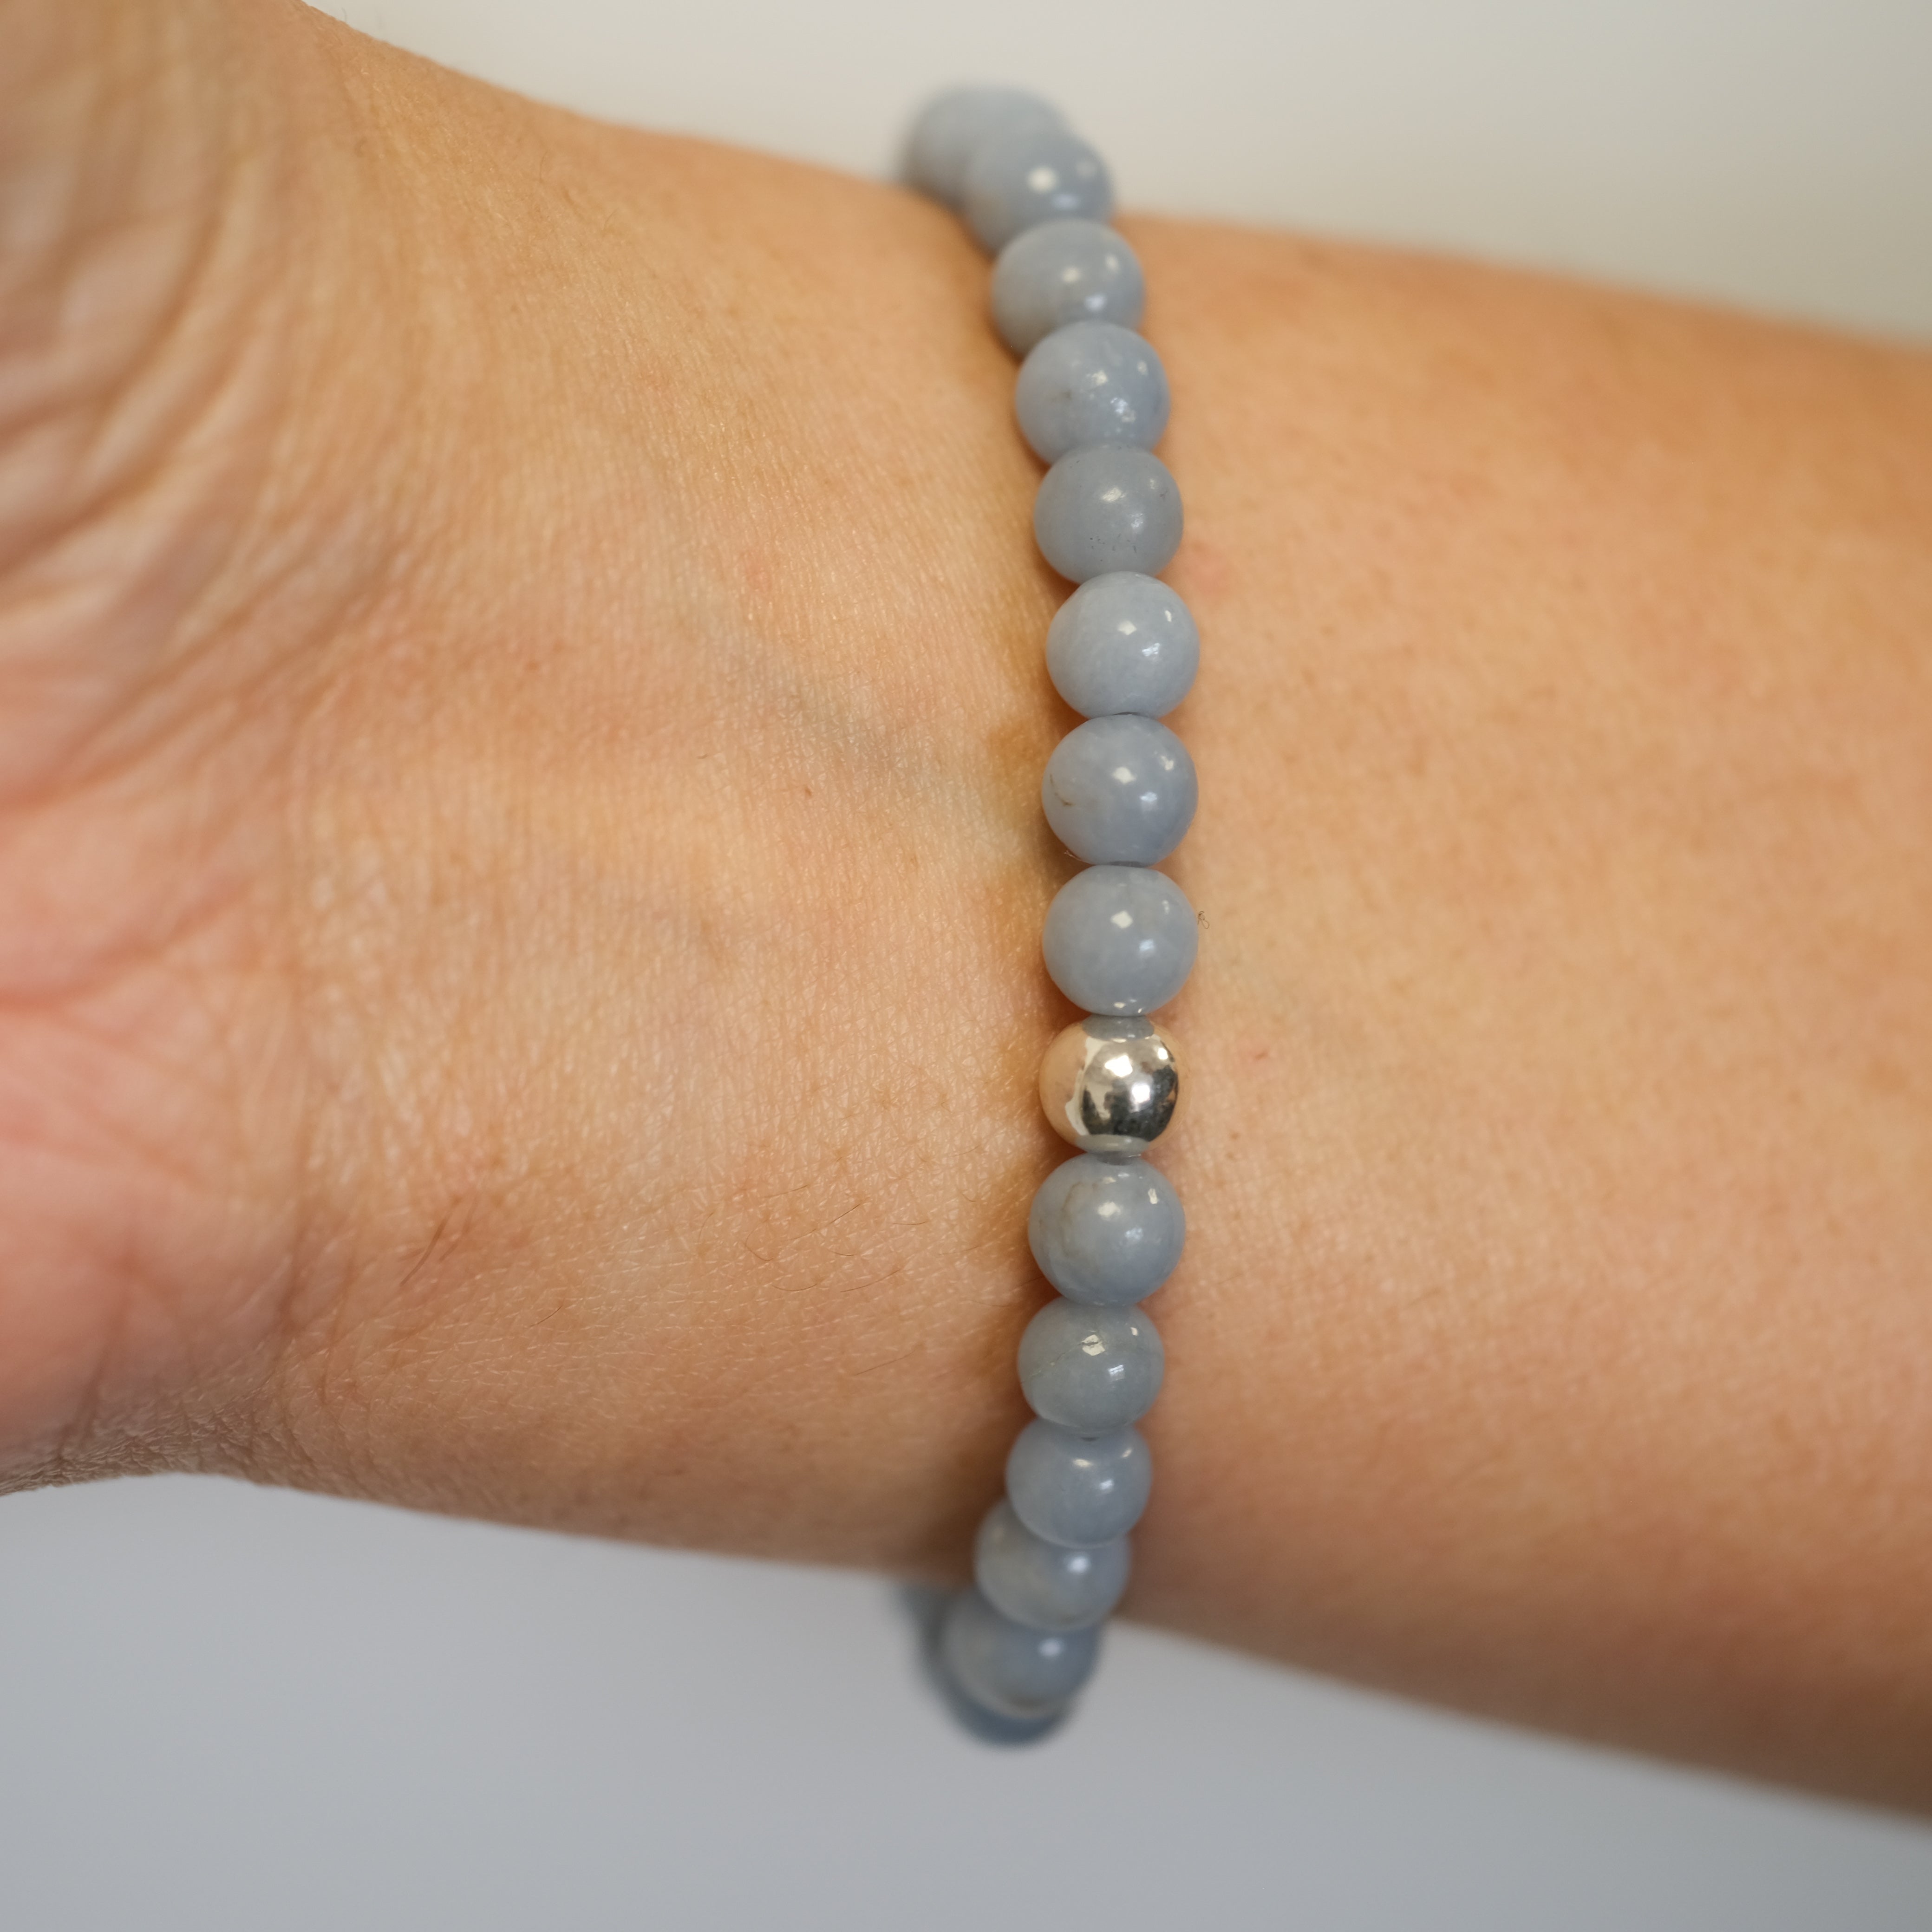 Angelite gemstone bracelet with silver accessories worn on a model's wrist from behind